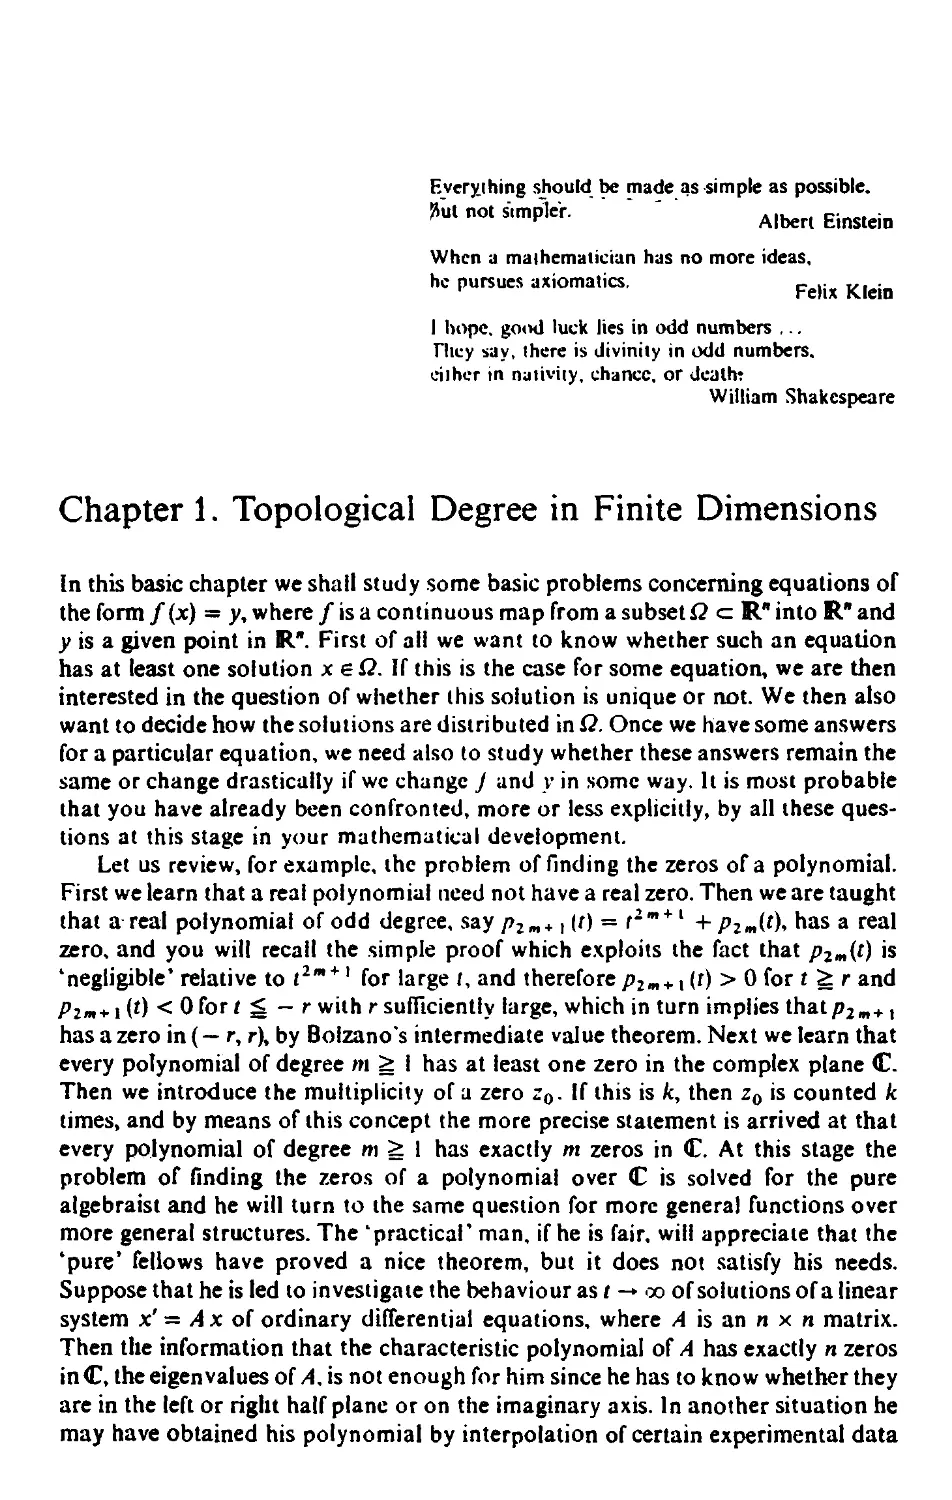 Chapter 1. Topological Degree in Finite Dimensions